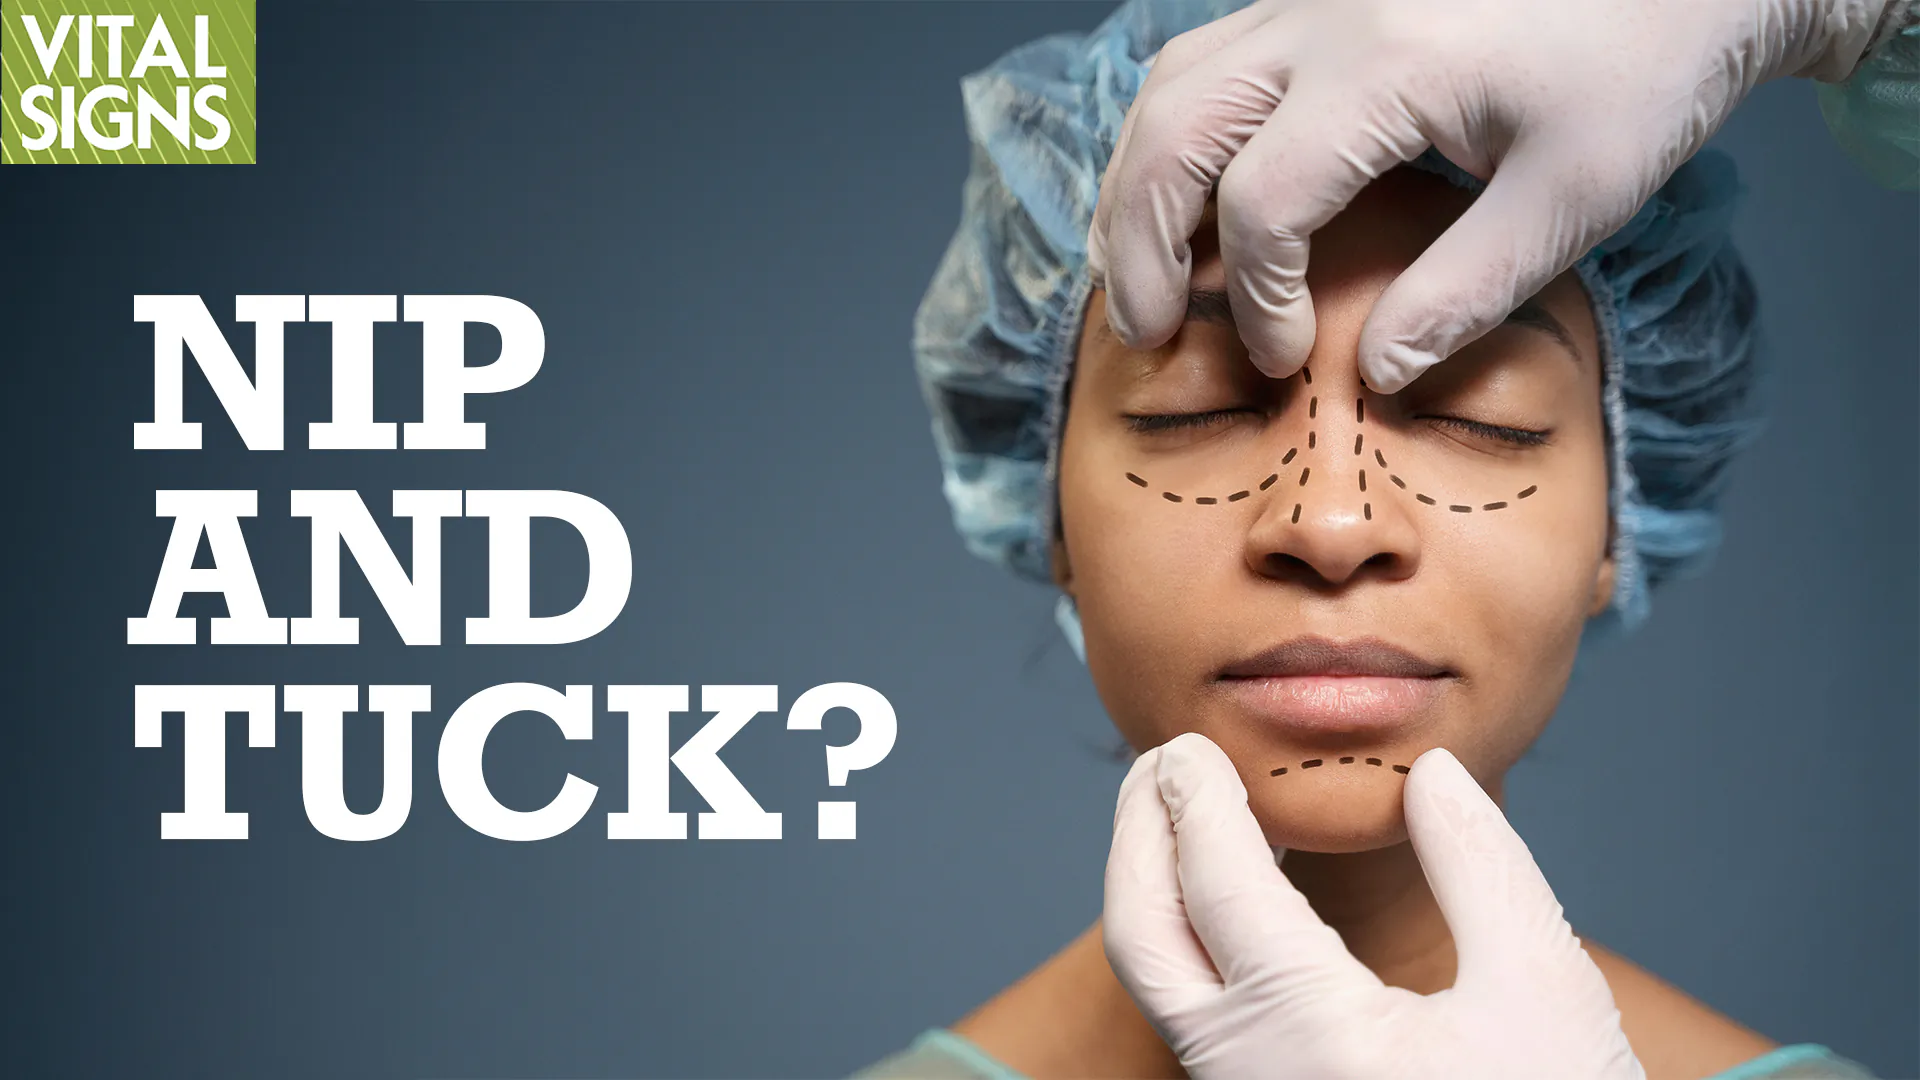 Does Cosmetic Surgery Make Life Better? Nip And Tuck?